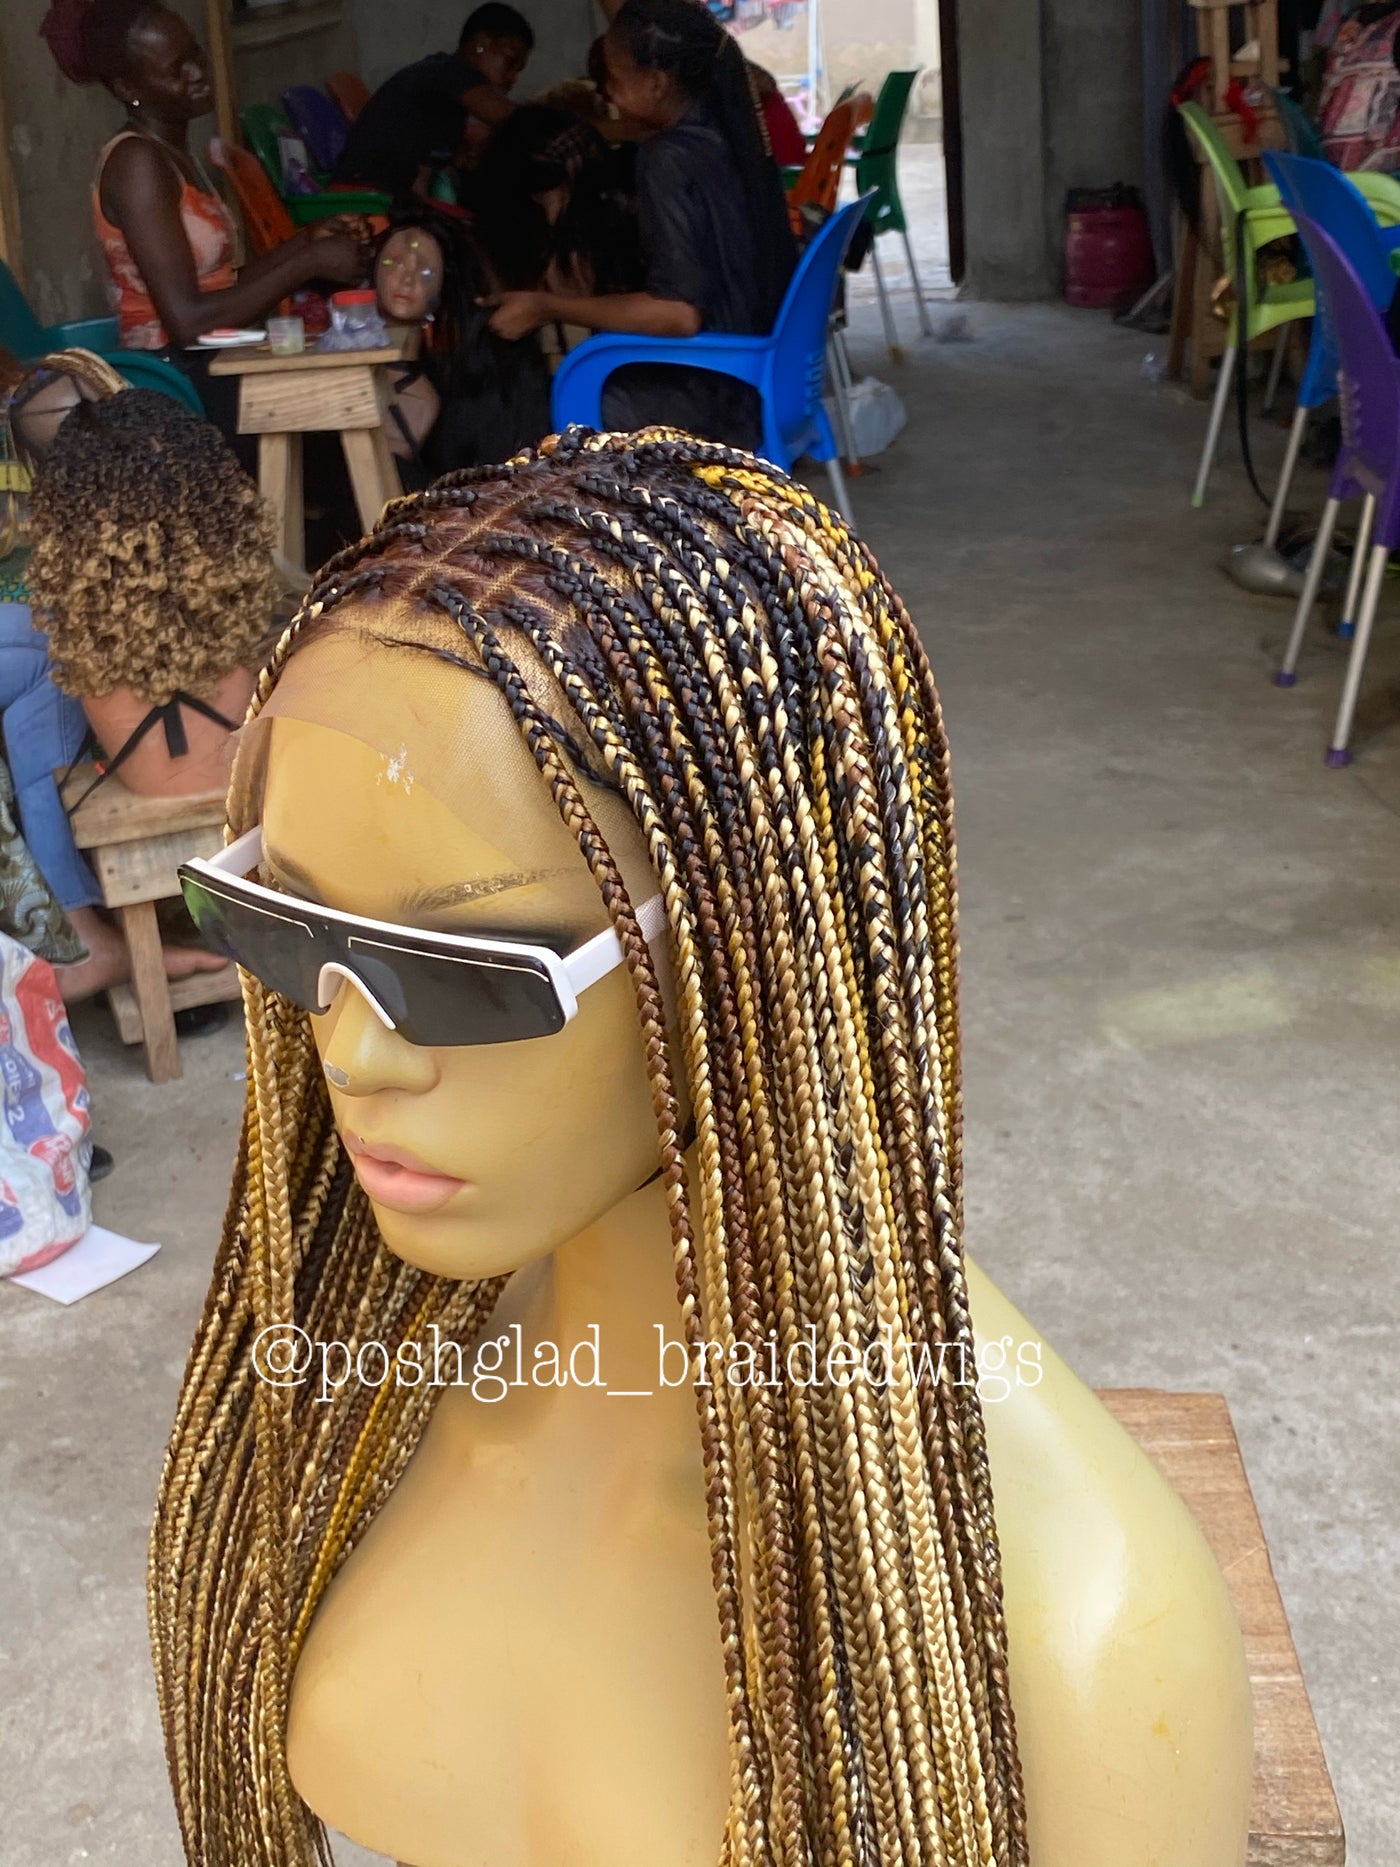 Knotless Braids Braids Wig Braided Wigs Burgundy Color Knotless Box Braids  Wig Fully Hand Braided Lace Frontal Wig Glueless Wig Wigs 